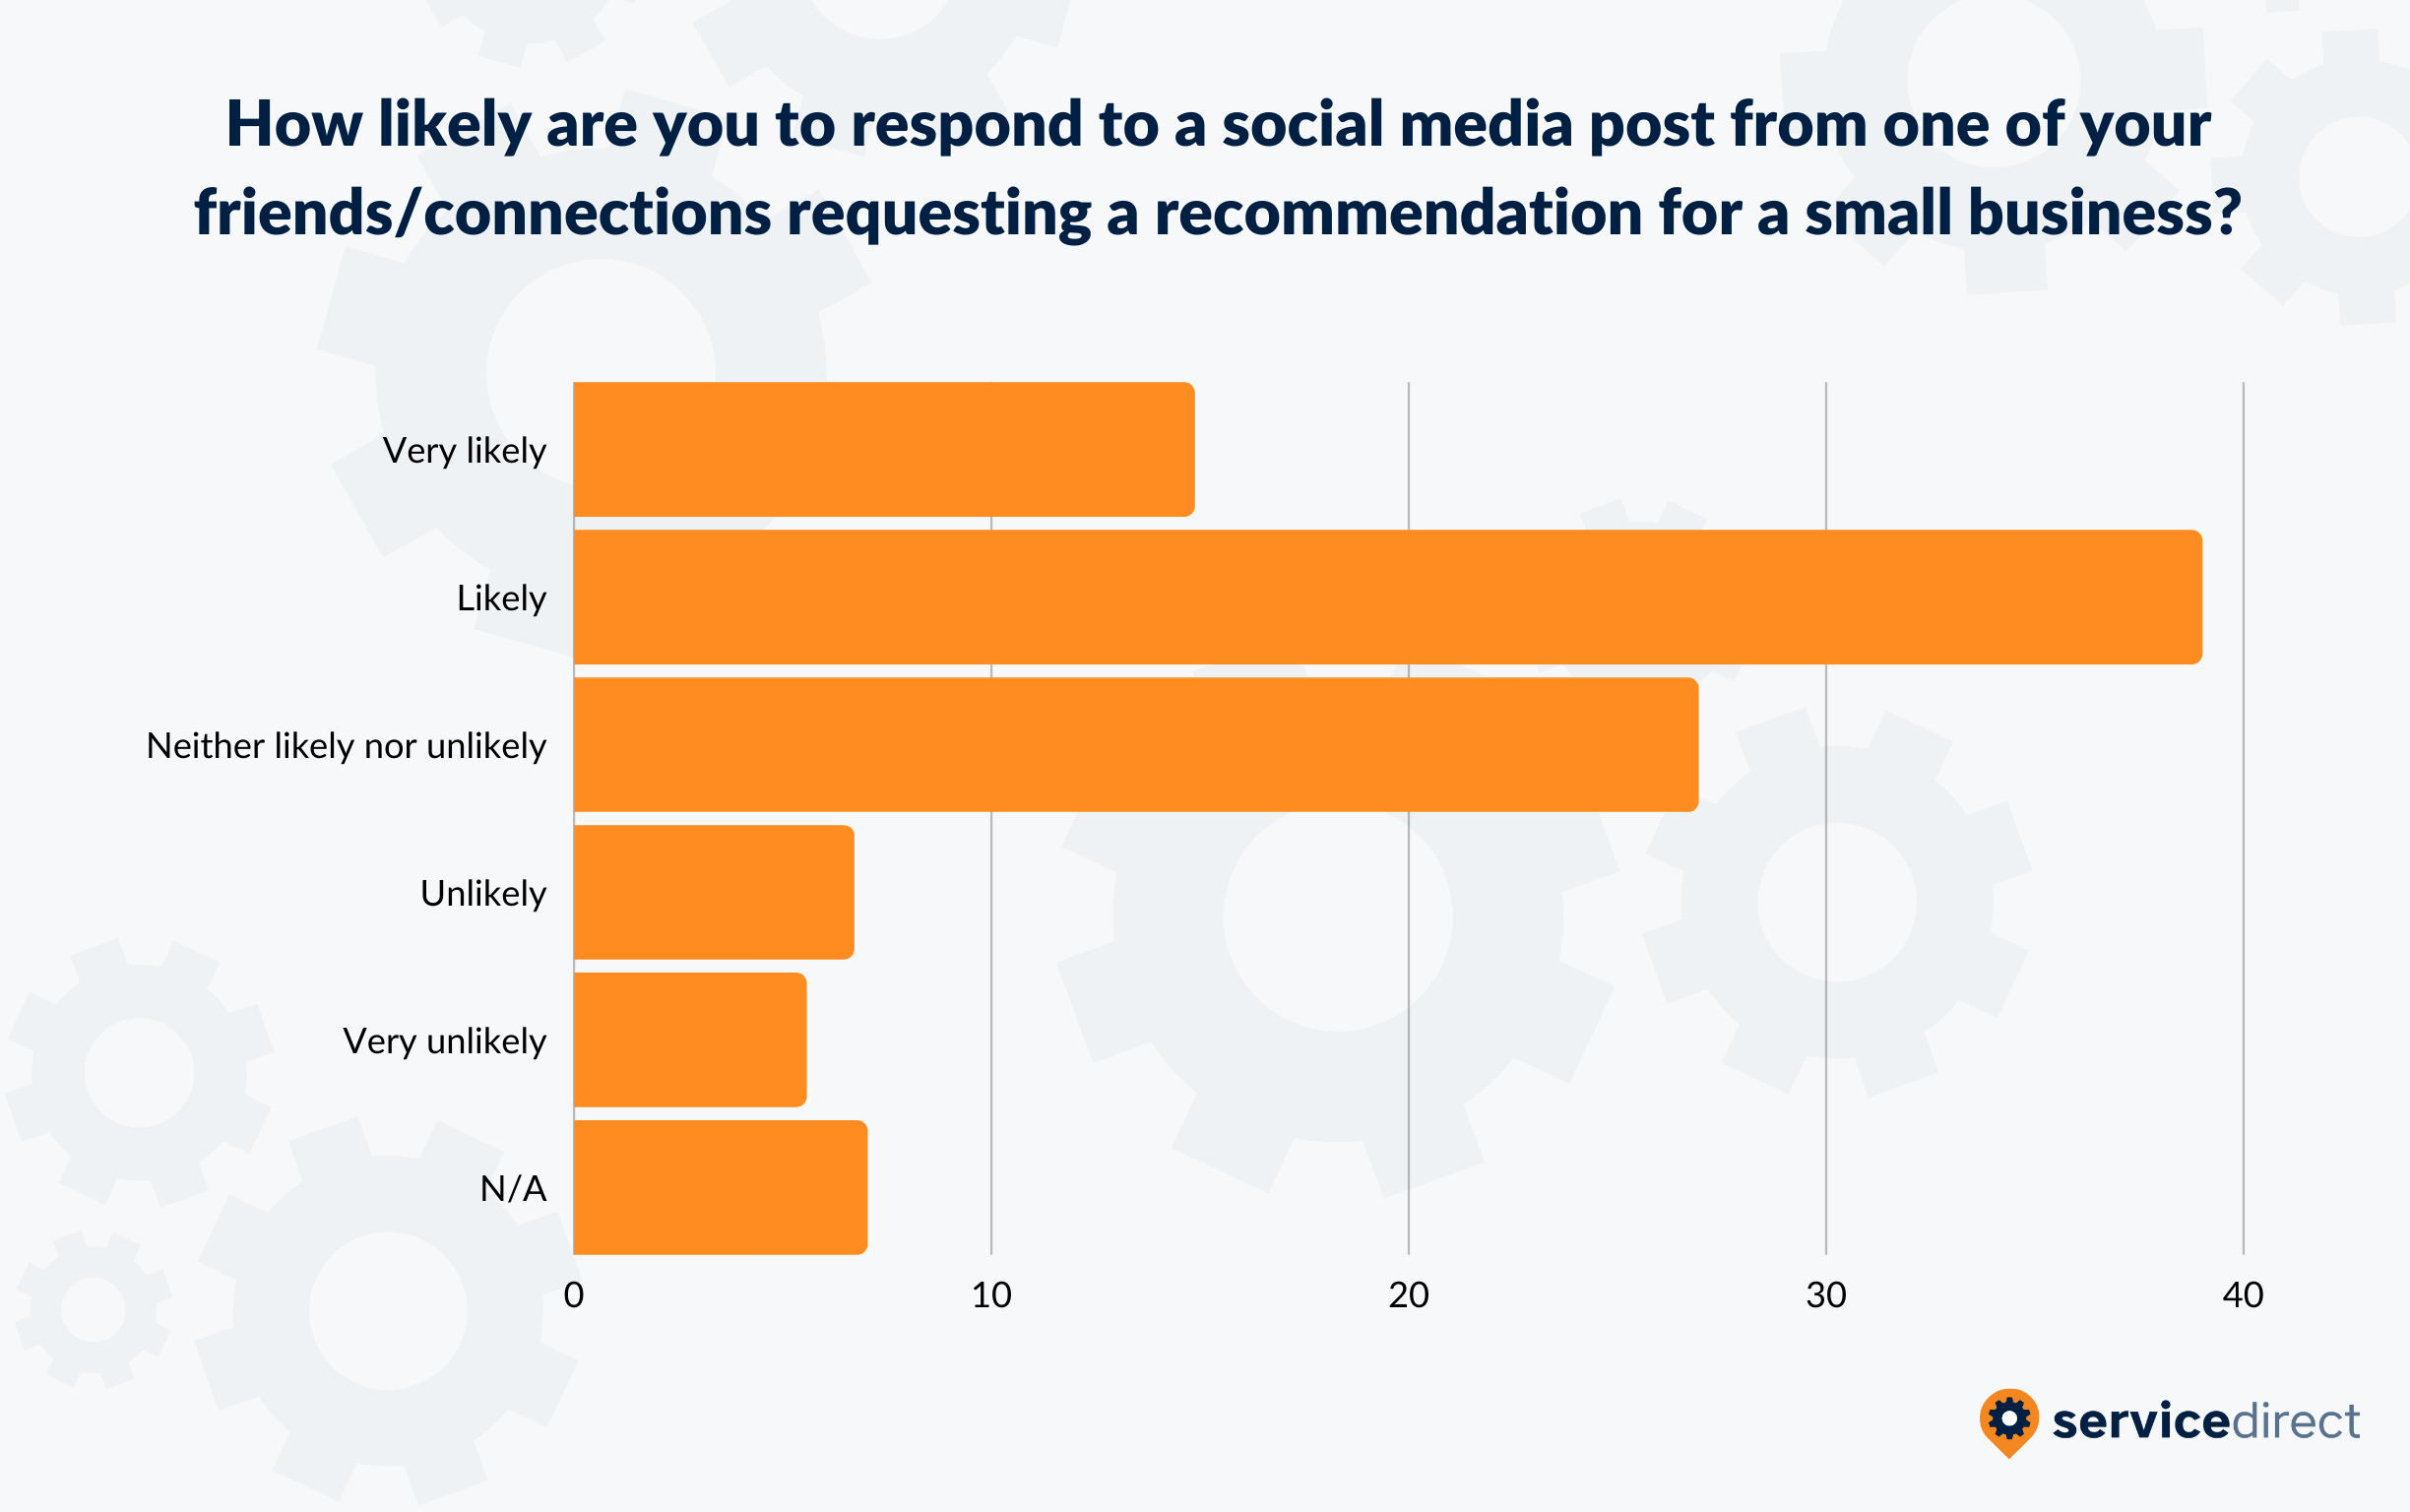 Likelihood of Giving a Recommendation From a Social Media Post